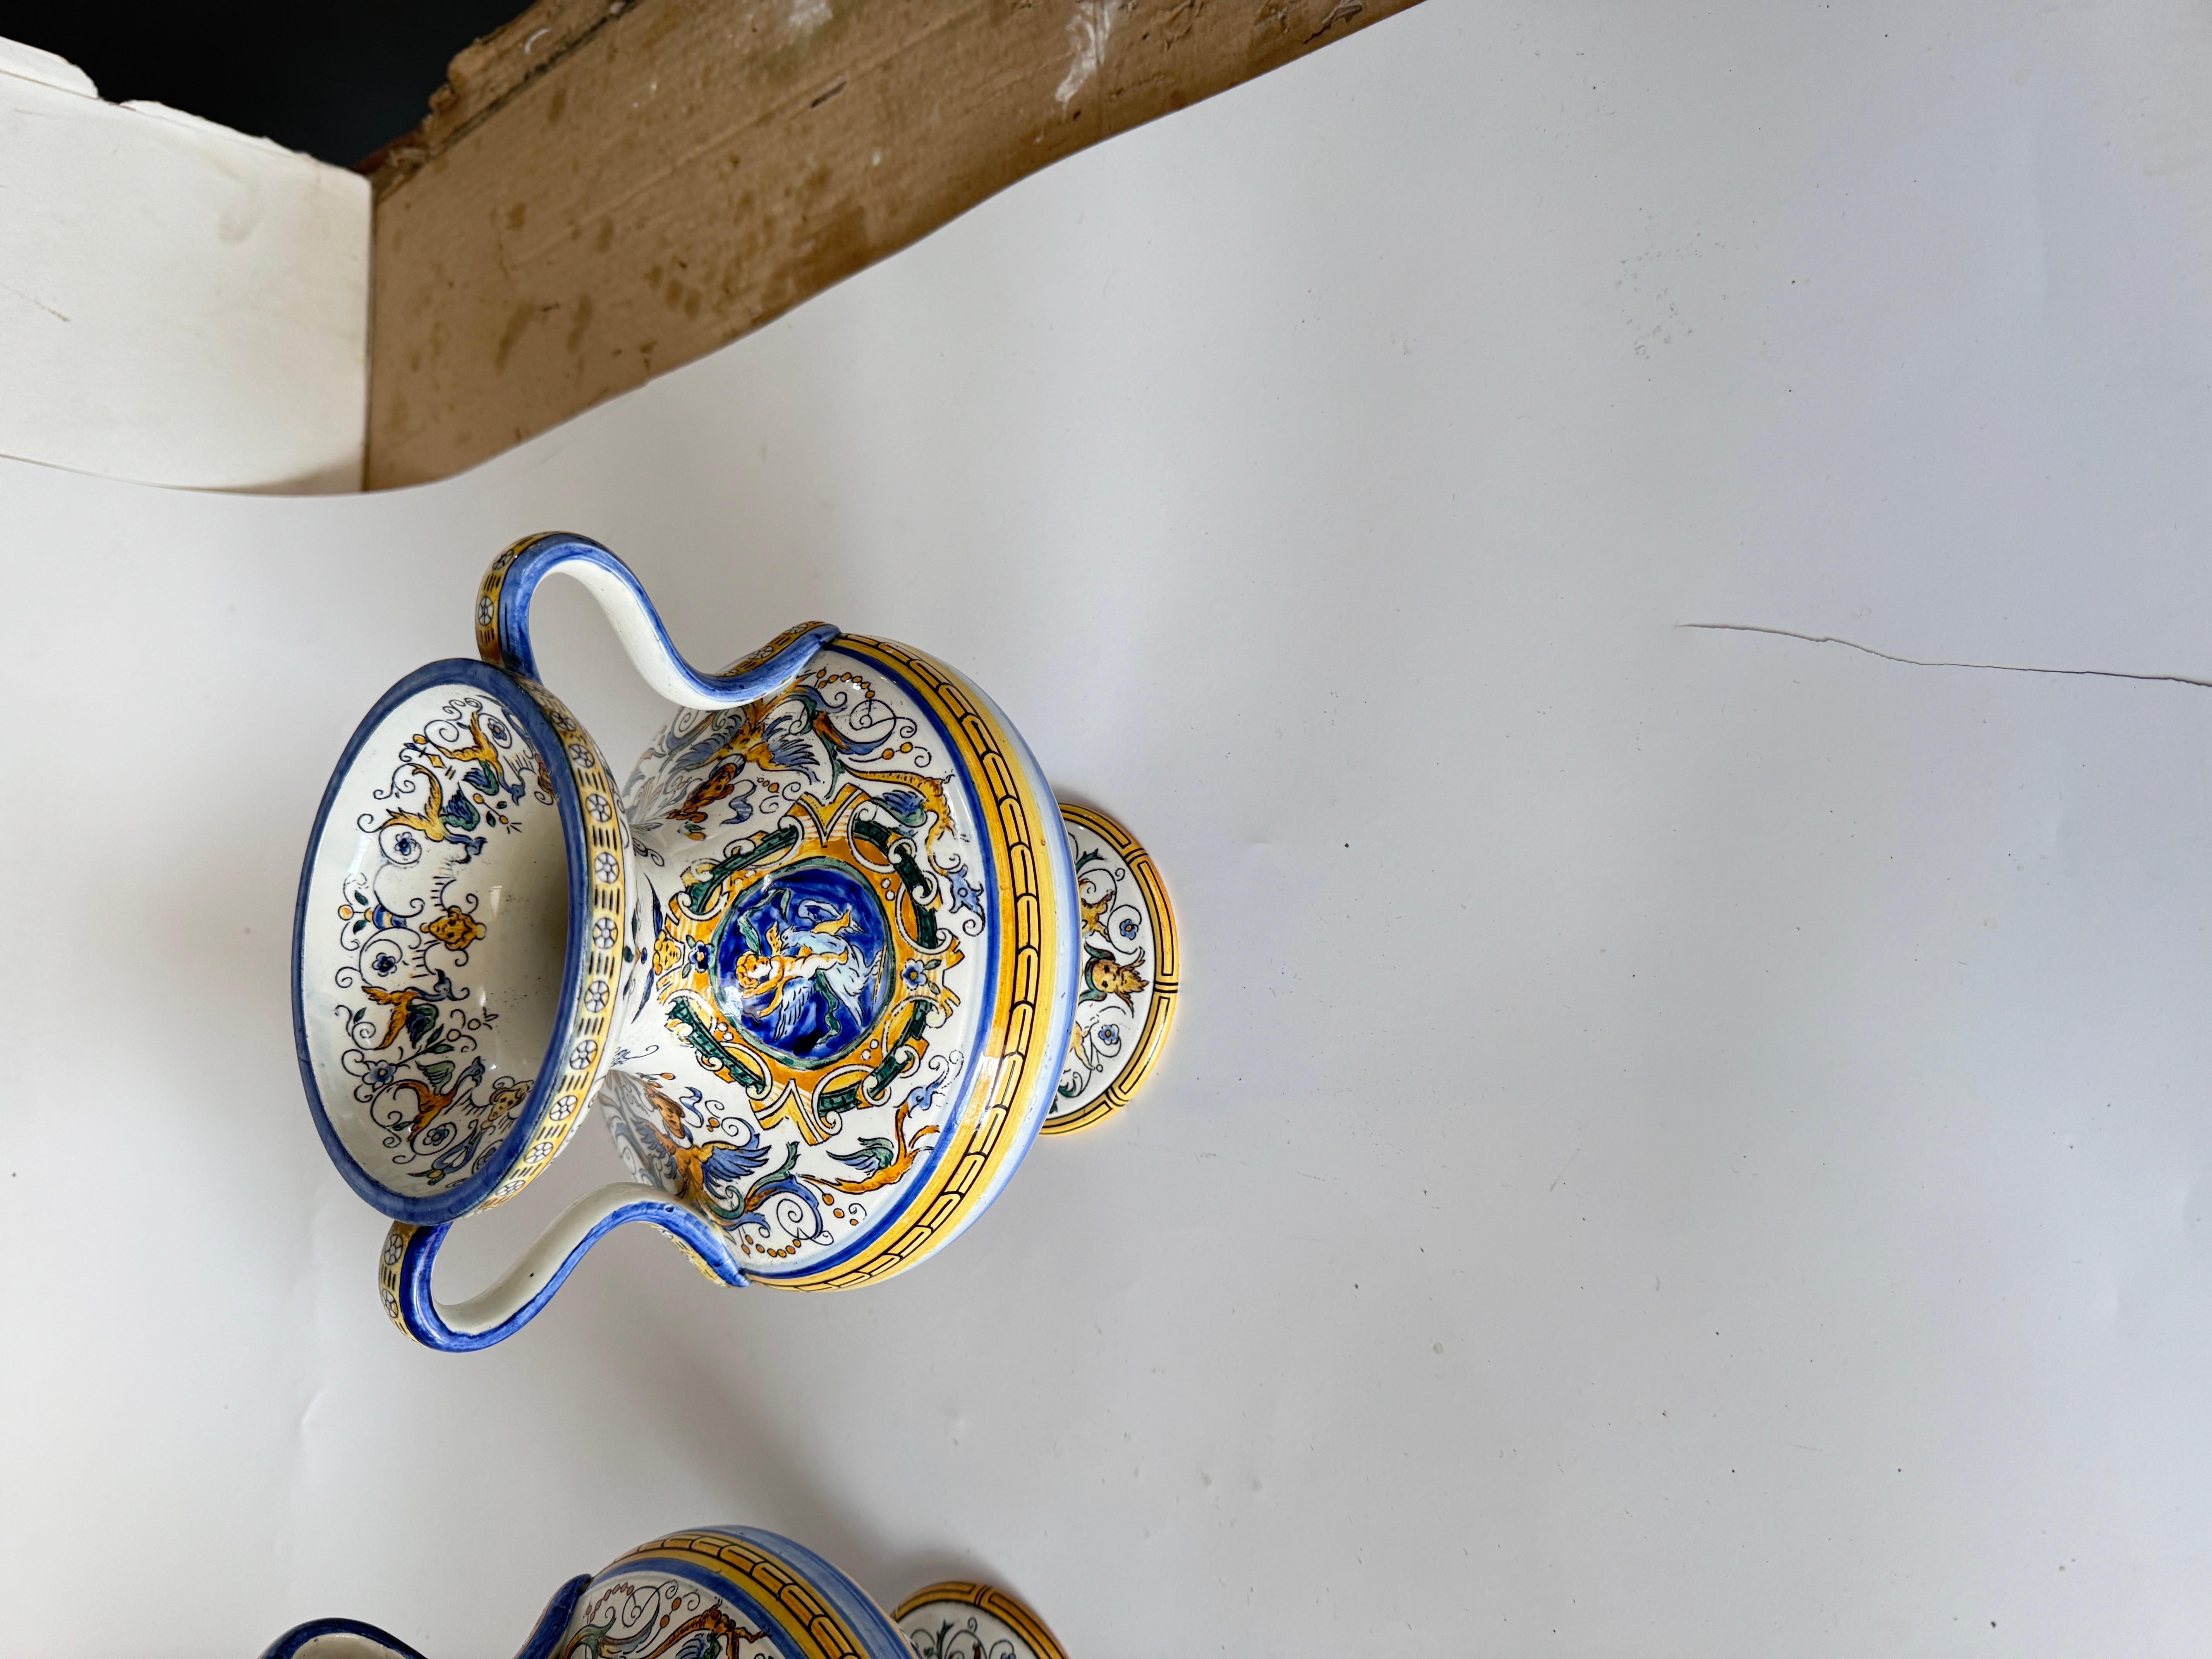 Hand-Crafted 19th Century French Hand-Painted Faience Vases Signed set of 2 For Sale